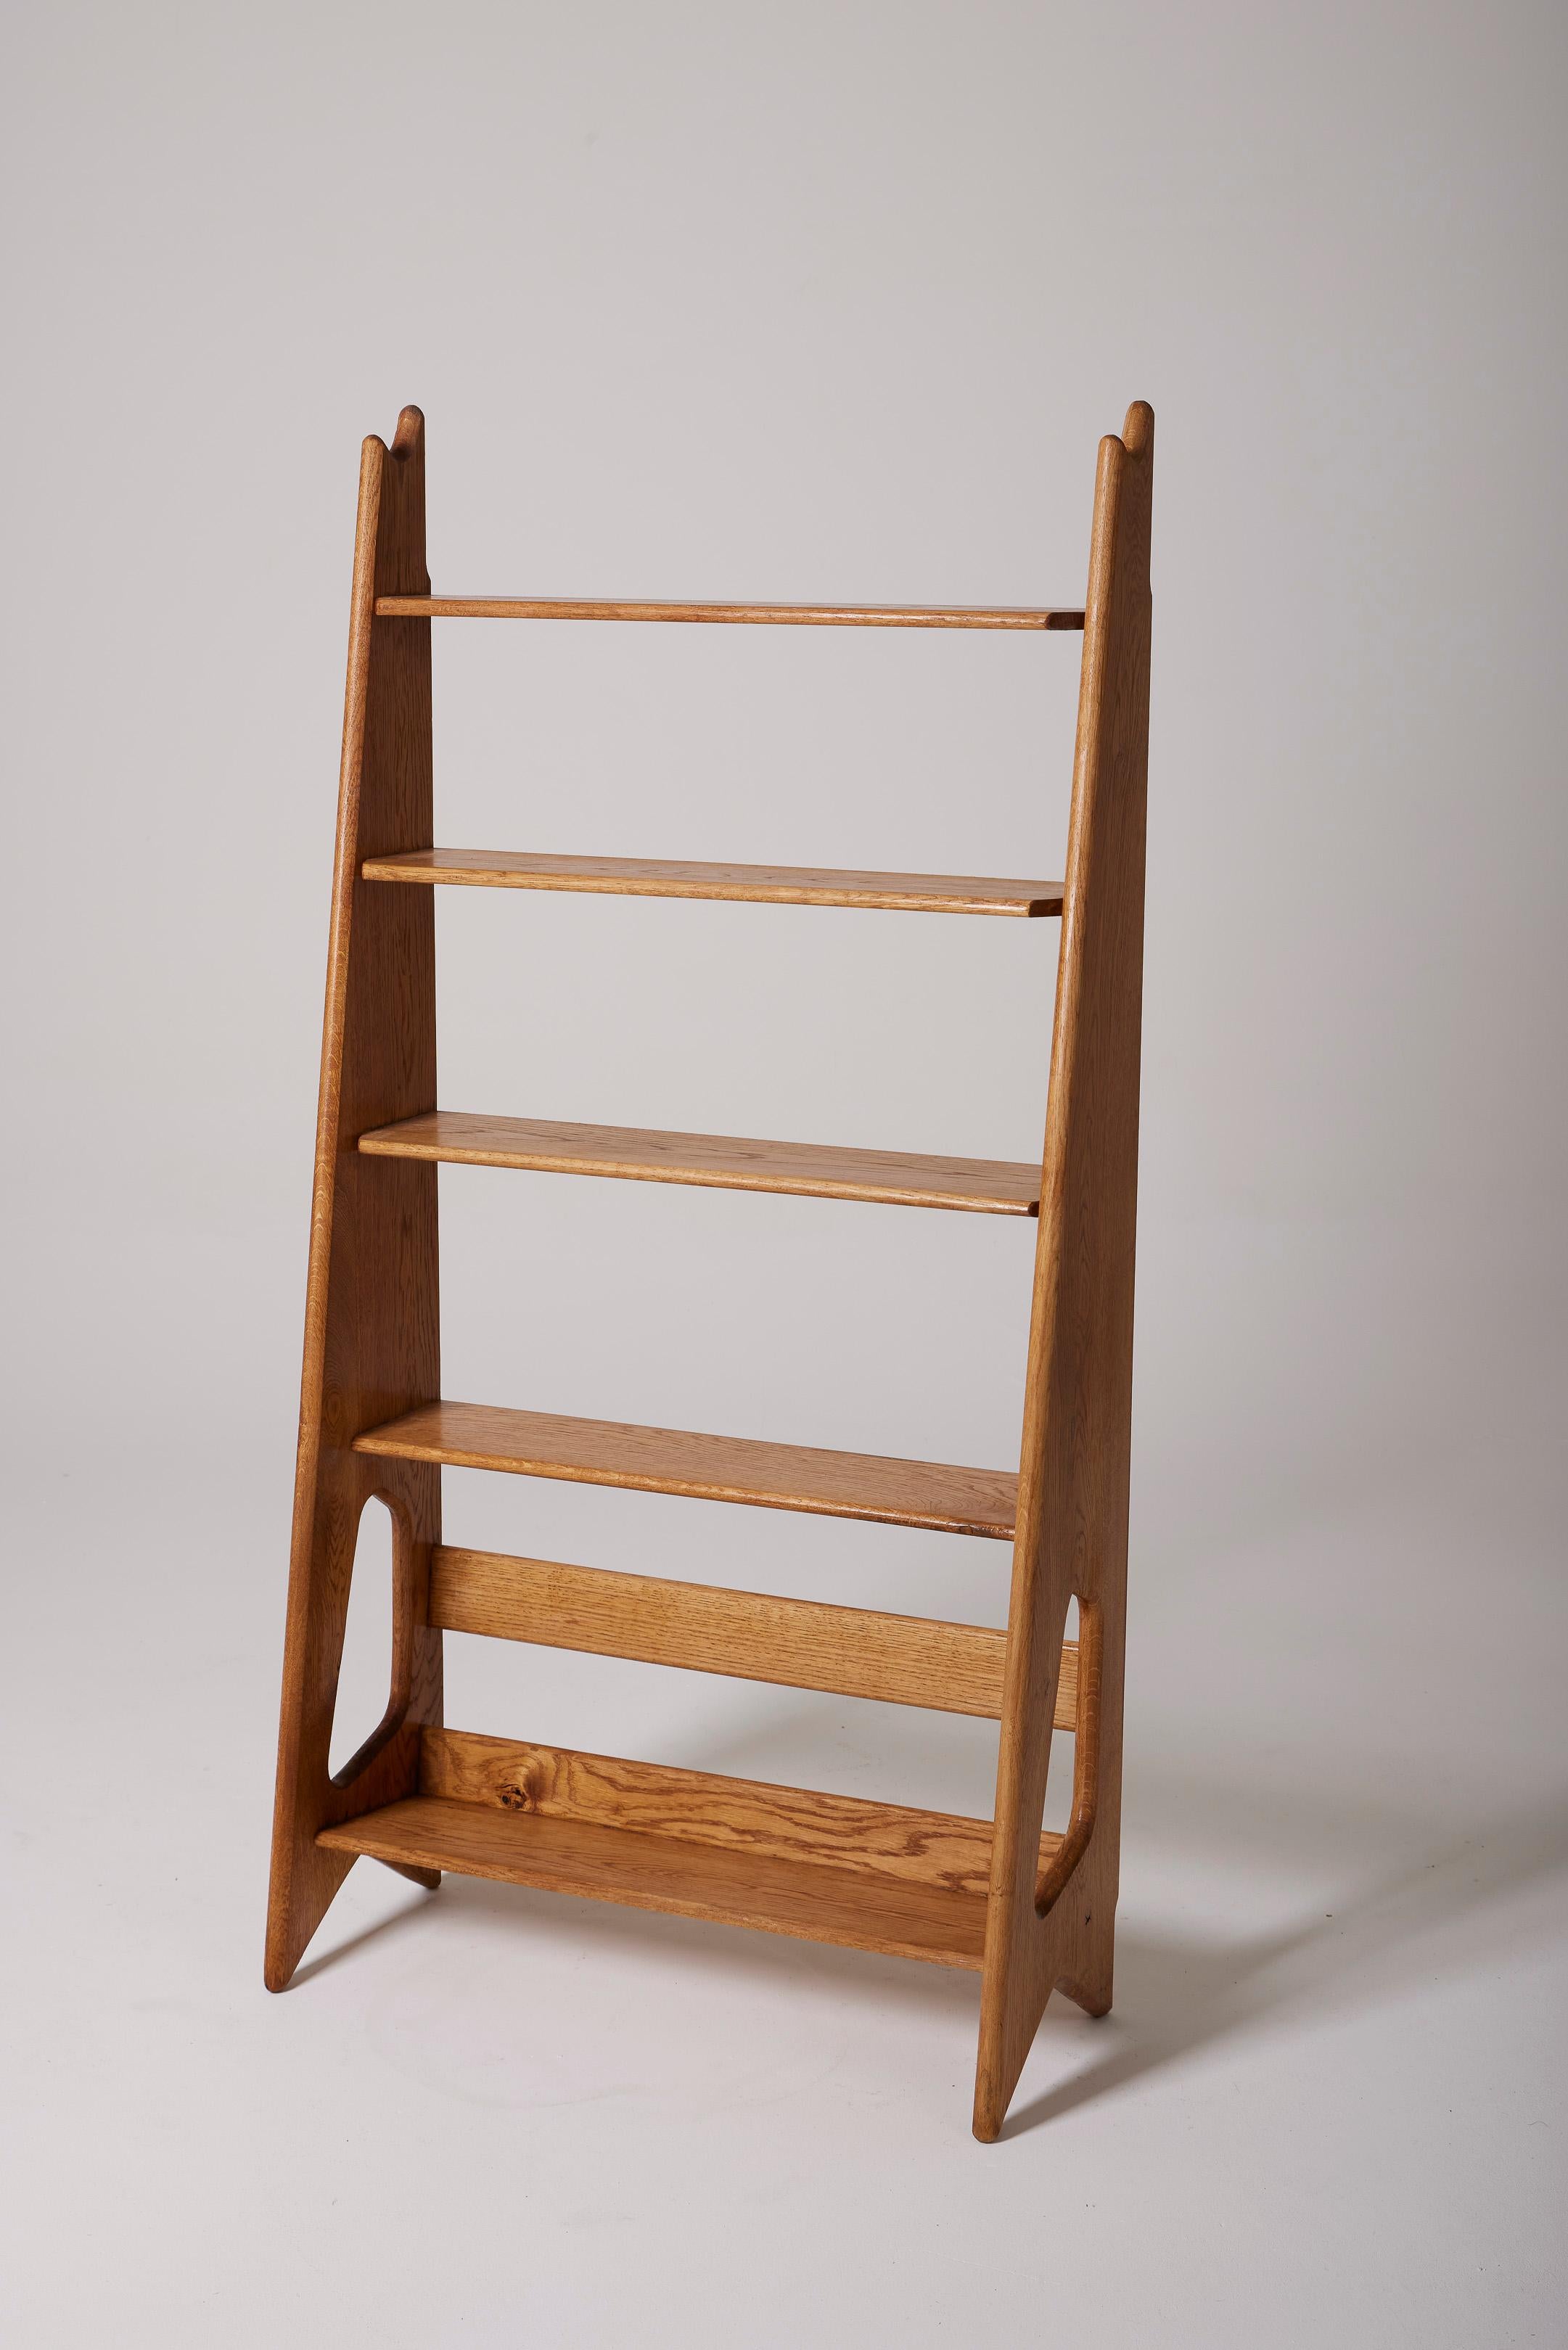 Wooden shelf by French designer Pierre Cruège (1913-2003) from the 1950s. This shelf is made of solid oak and consists of 5 shelves. Very good condition. Pierre Cruège enrolled in 1930 at the Bordeaux School of Fine Arts in the workshop of master